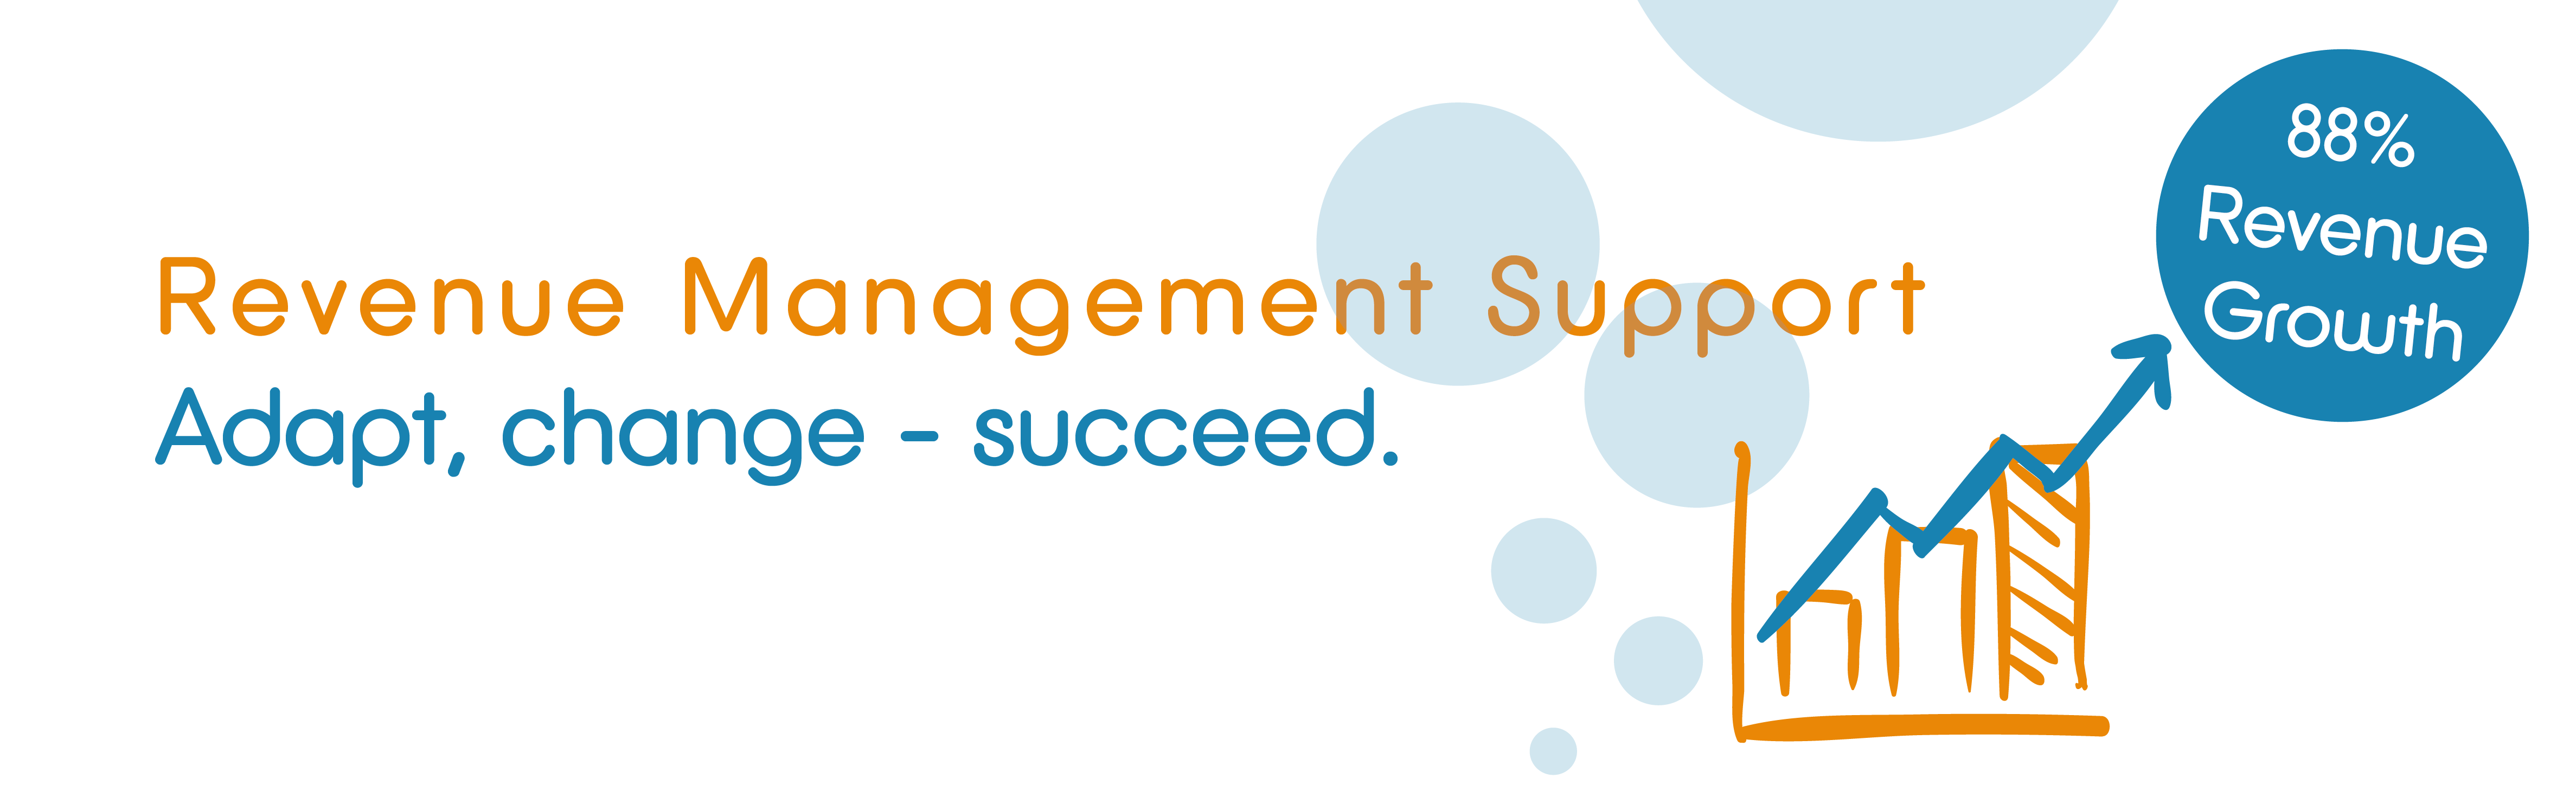 Hotel revenue management support to help you adapt, change and succeed 